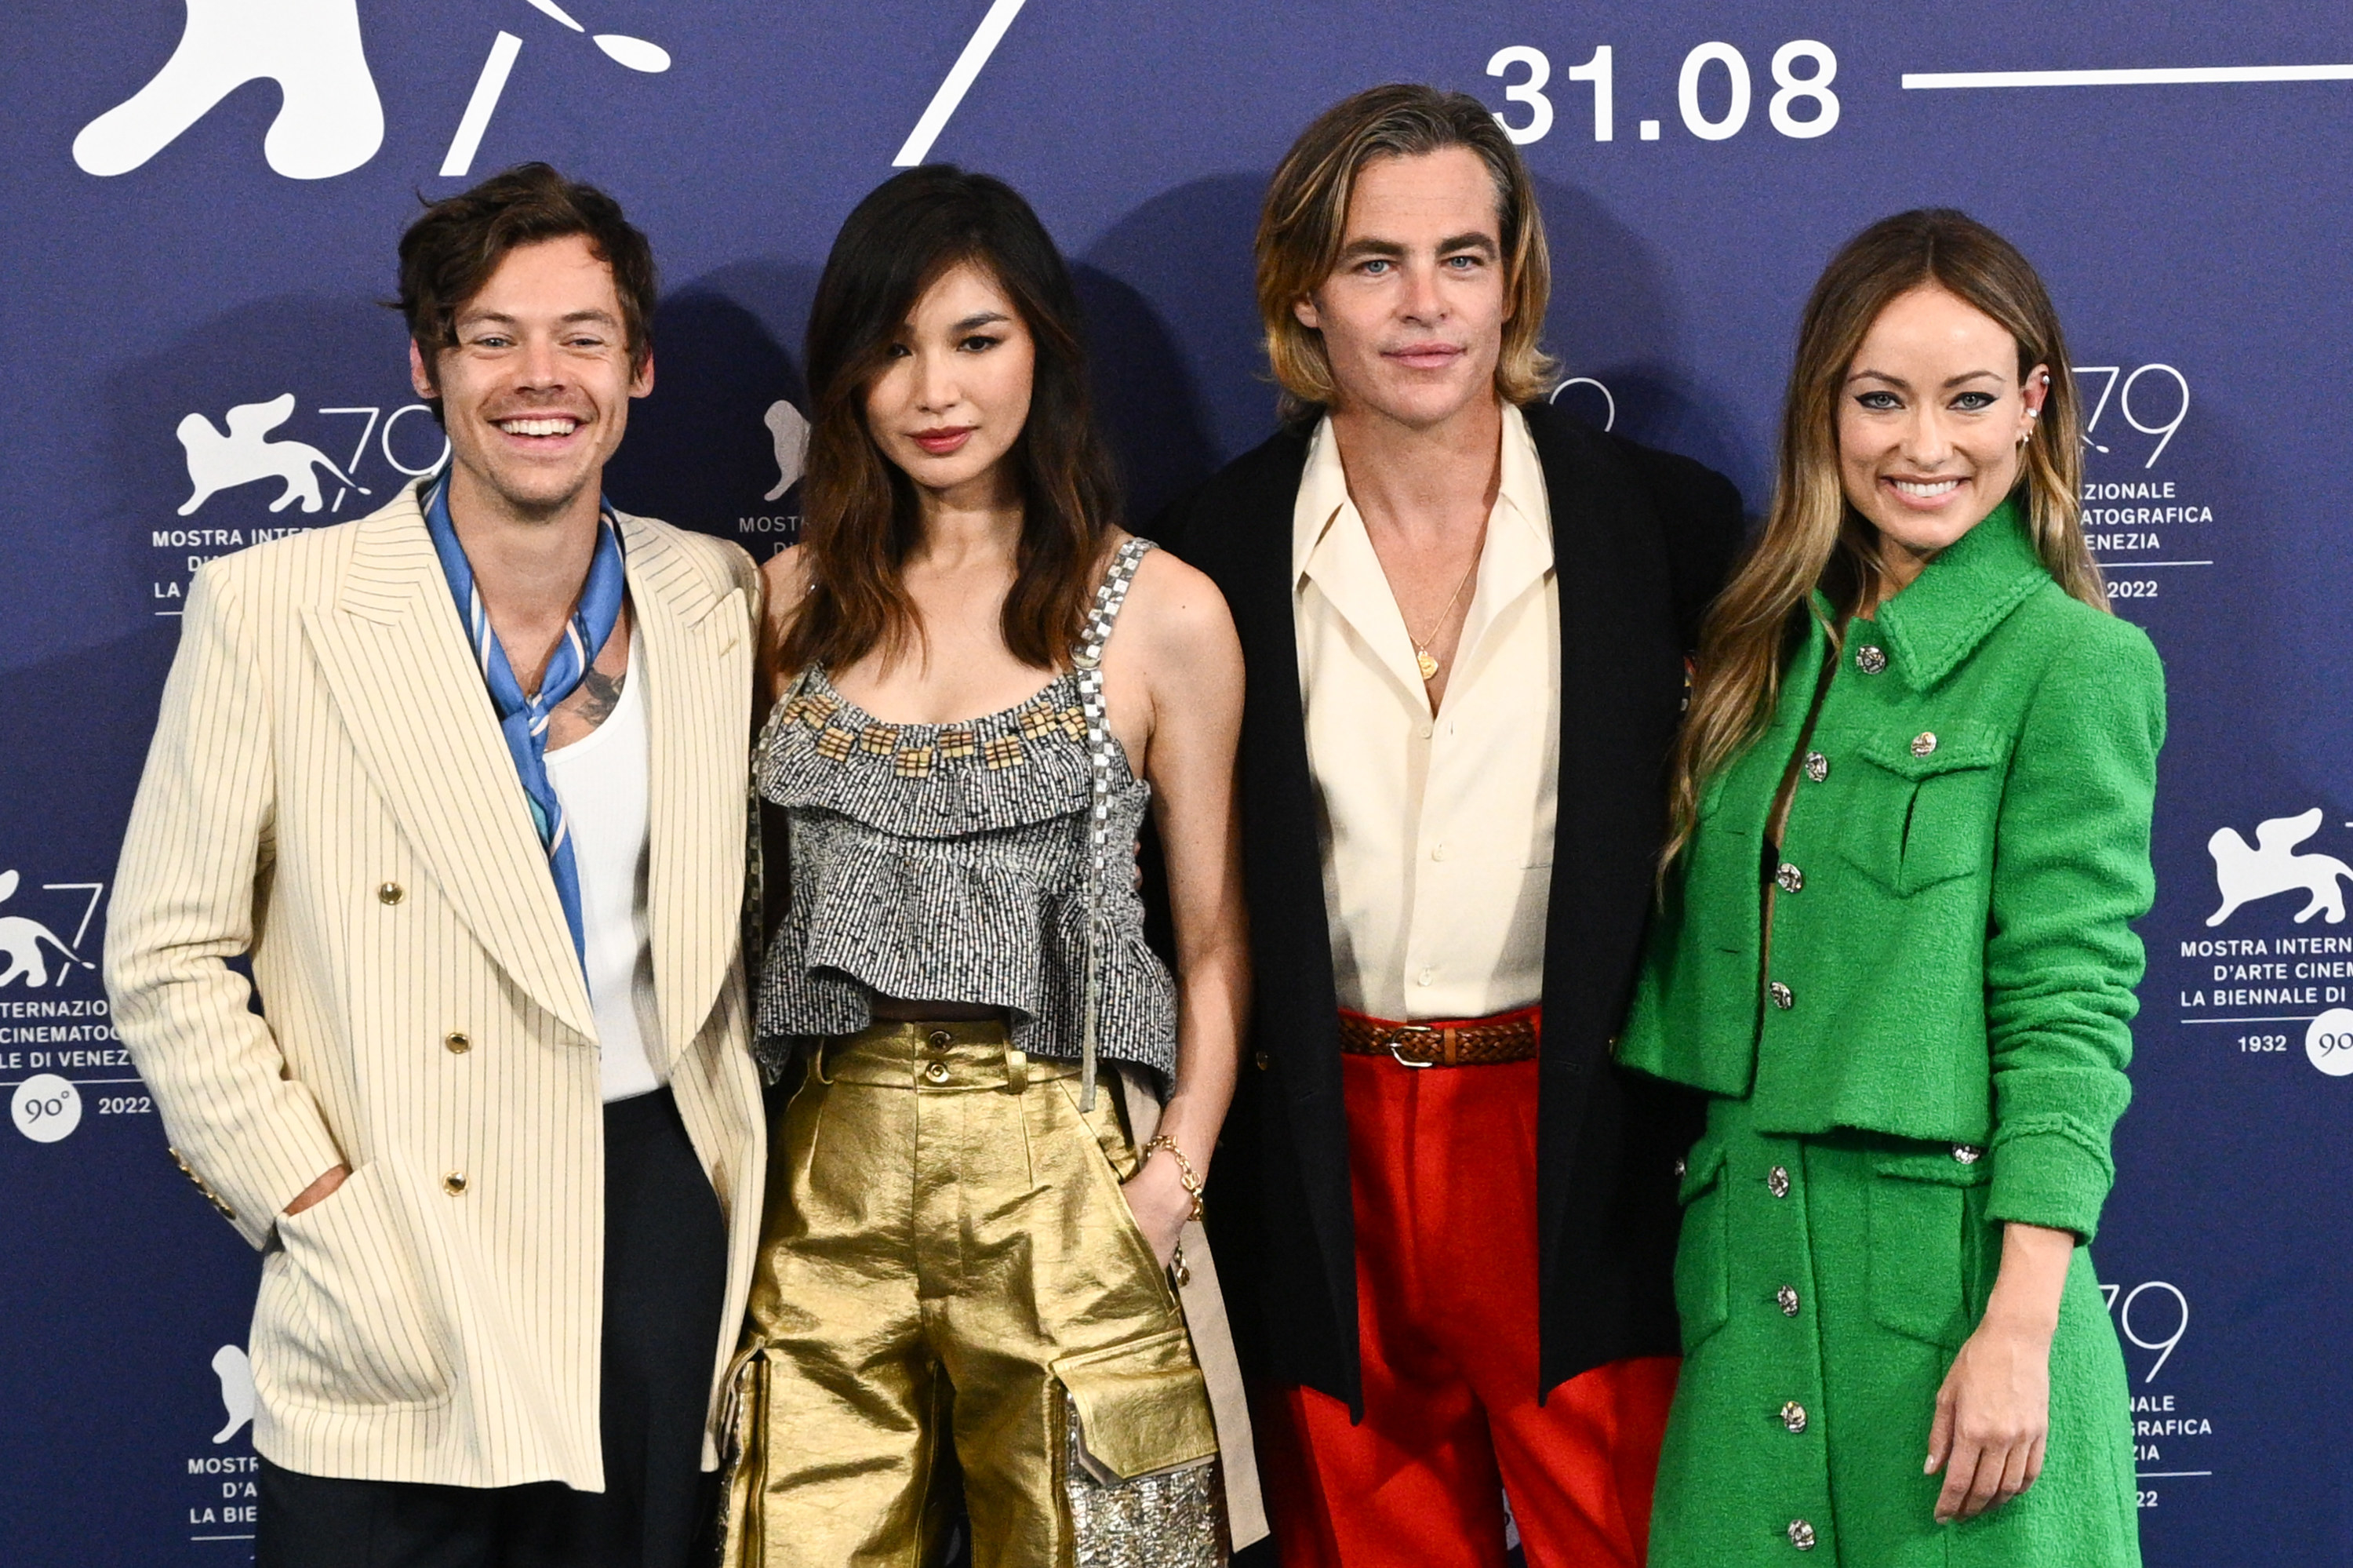 Harry, Gemma, Chris, and Olivia on the red carpet